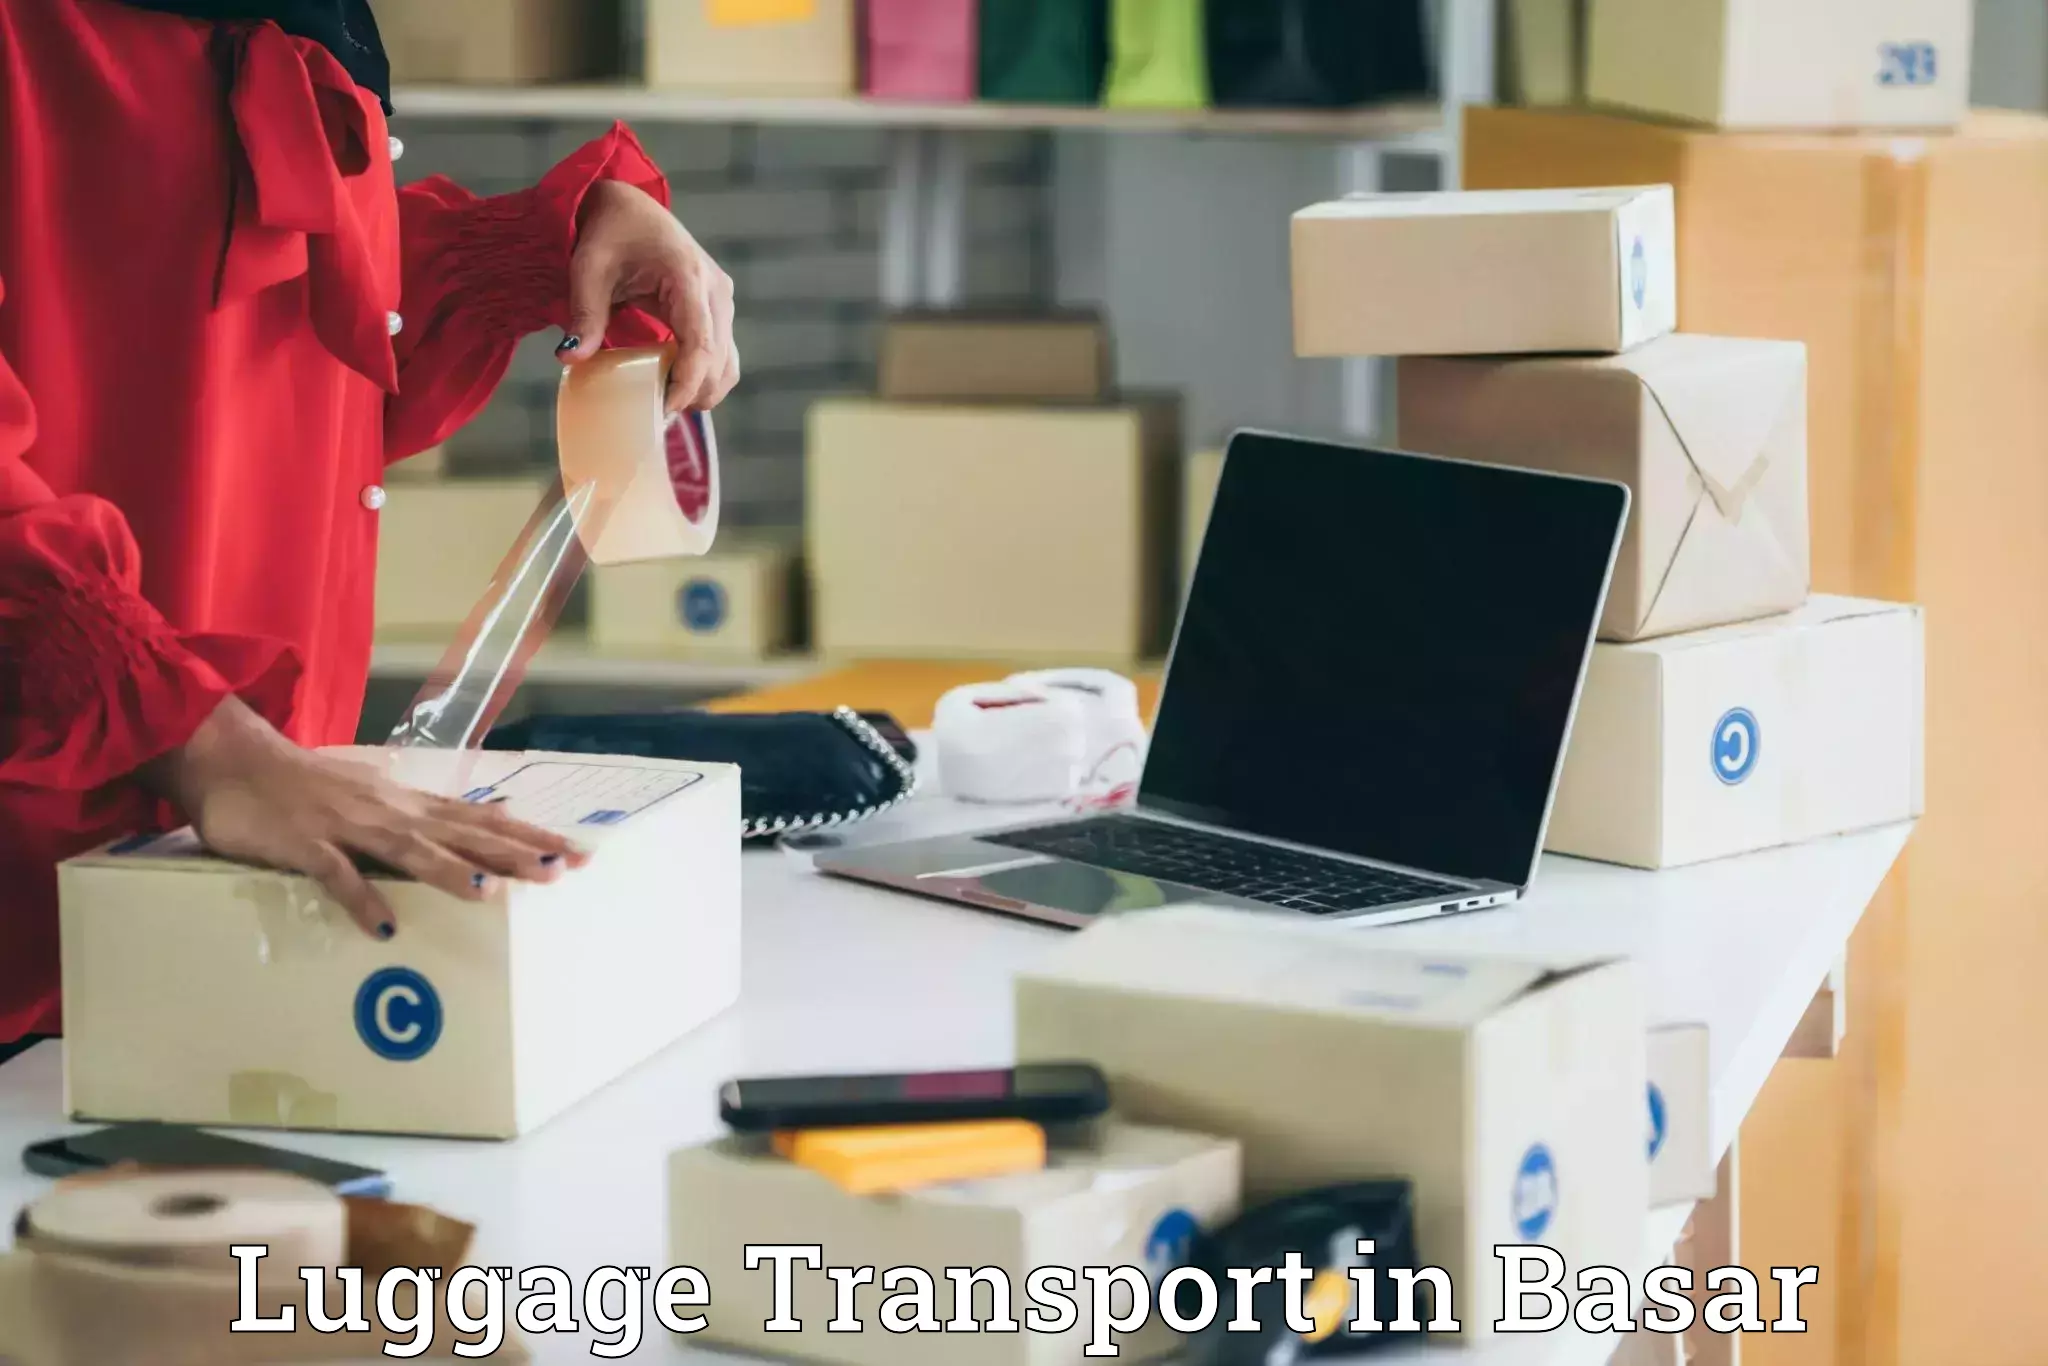 Baggage transport services in Basar